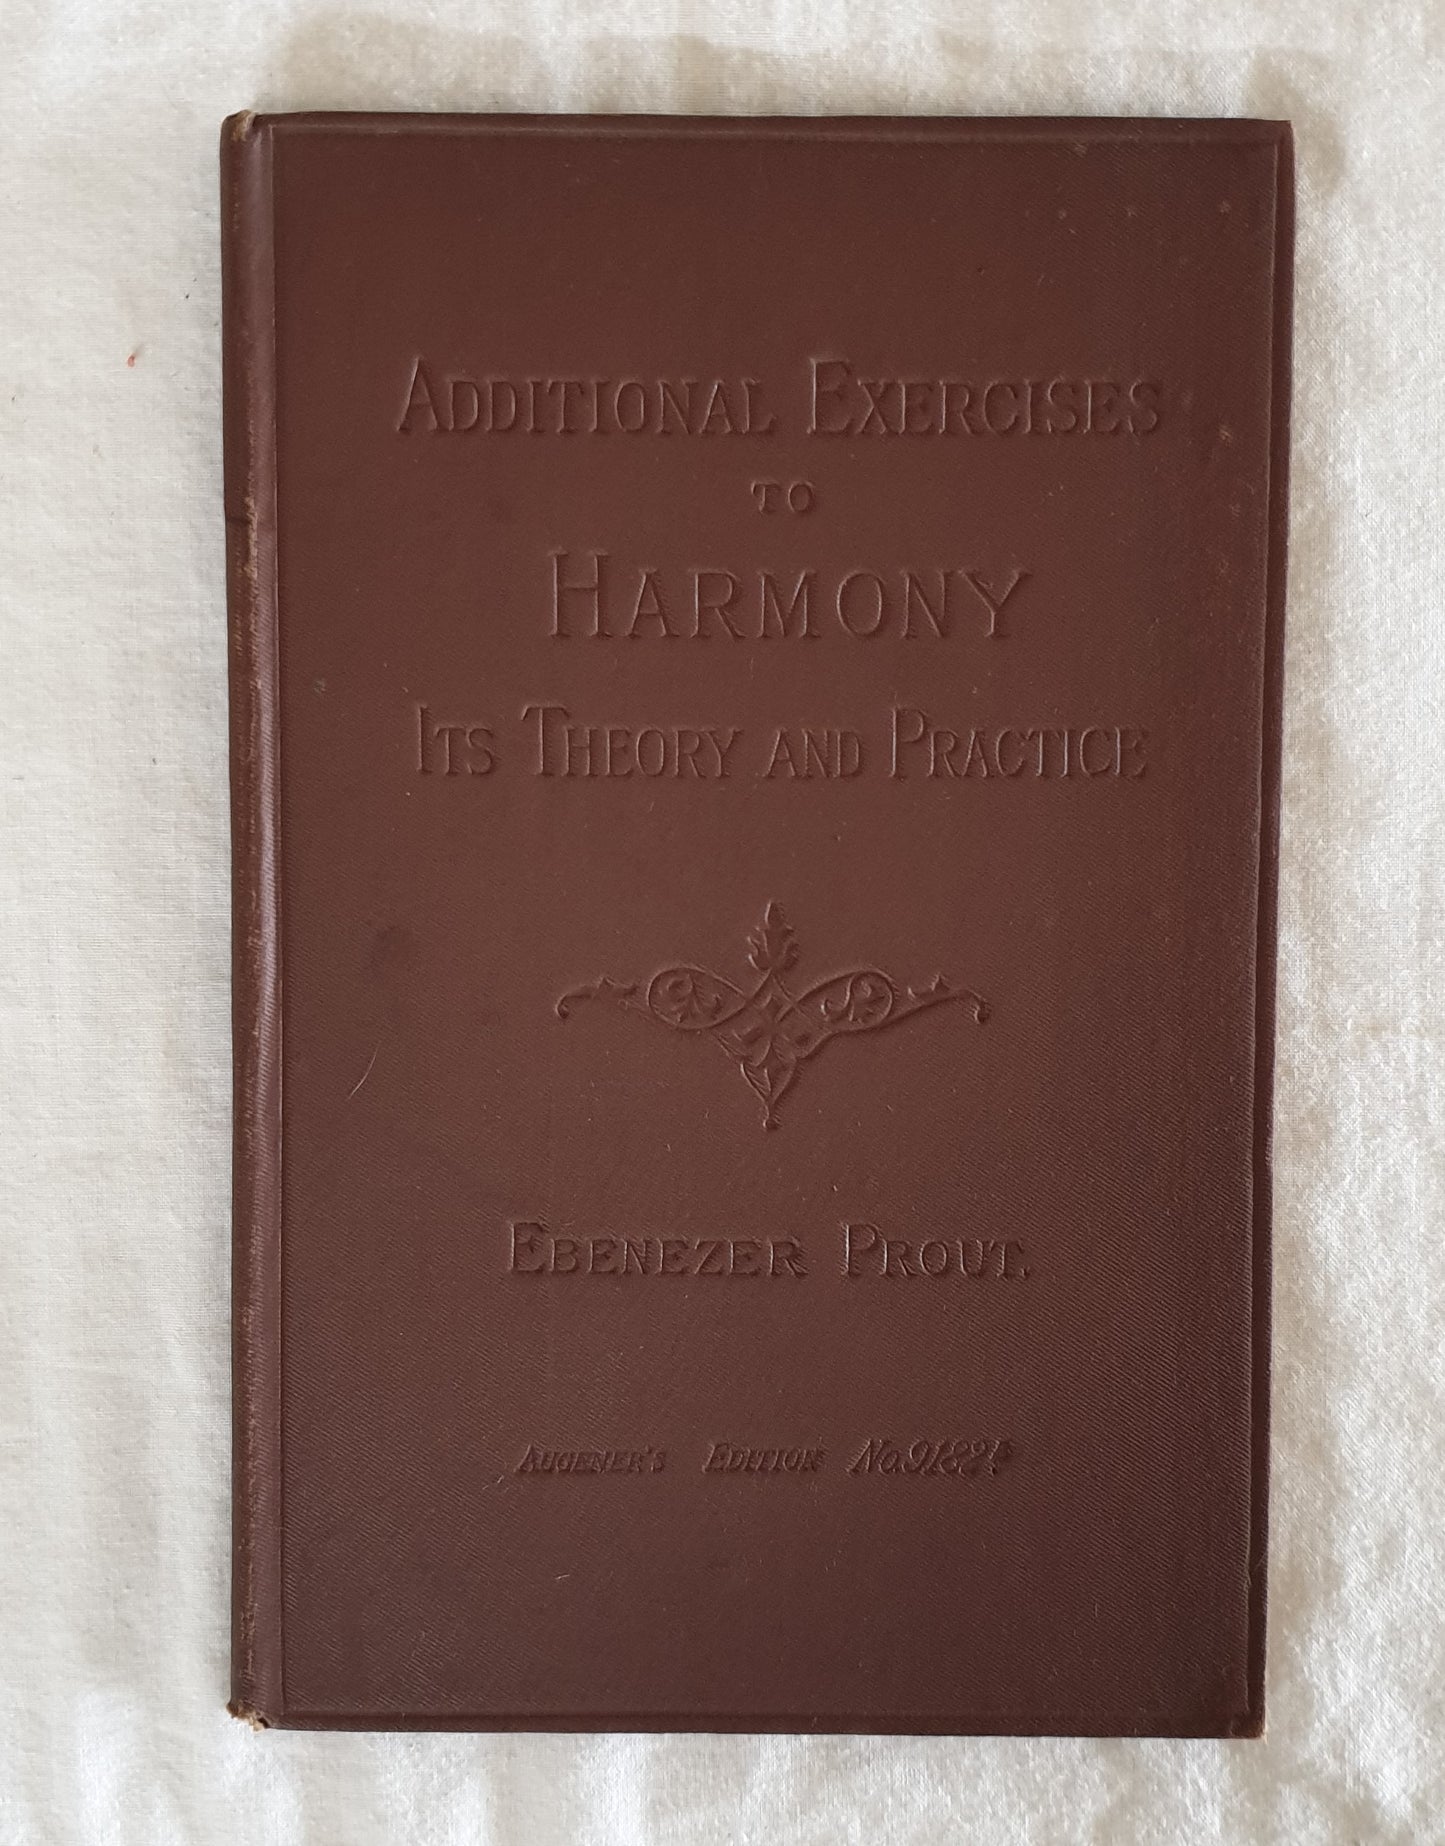 Additional Exercises to Harmony  Its Theory and Practice  by Ebenezer Prout